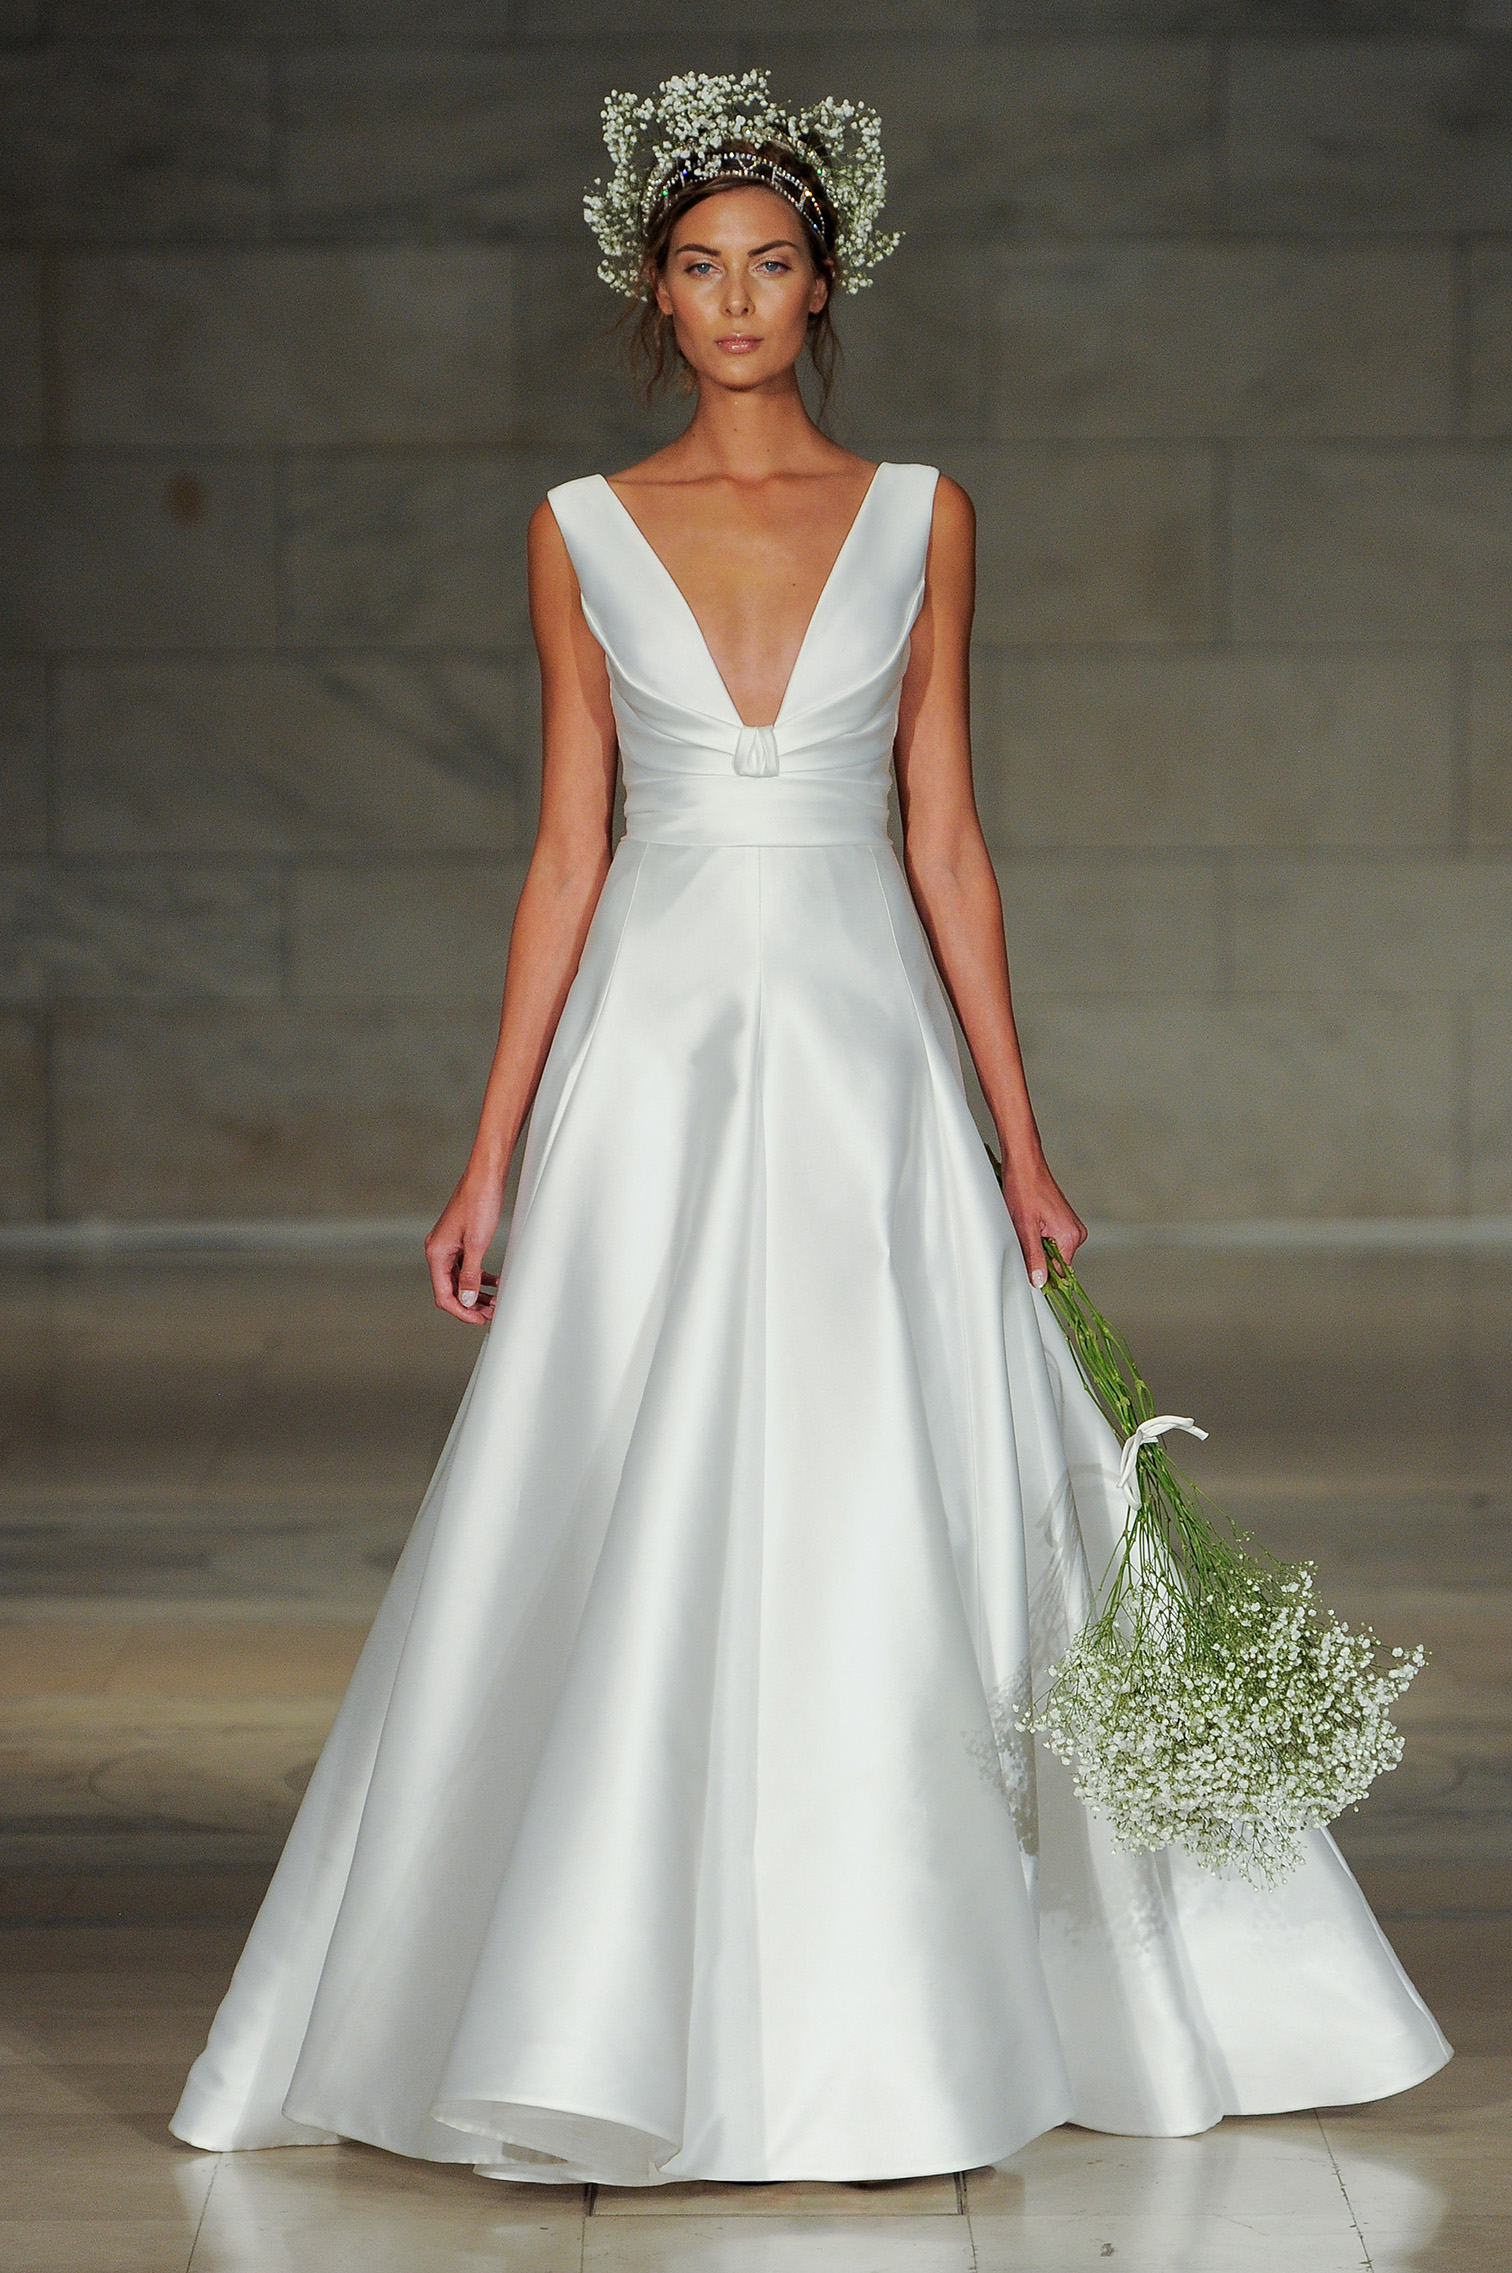 Royal Wedding gown inspiration by Reem Acra